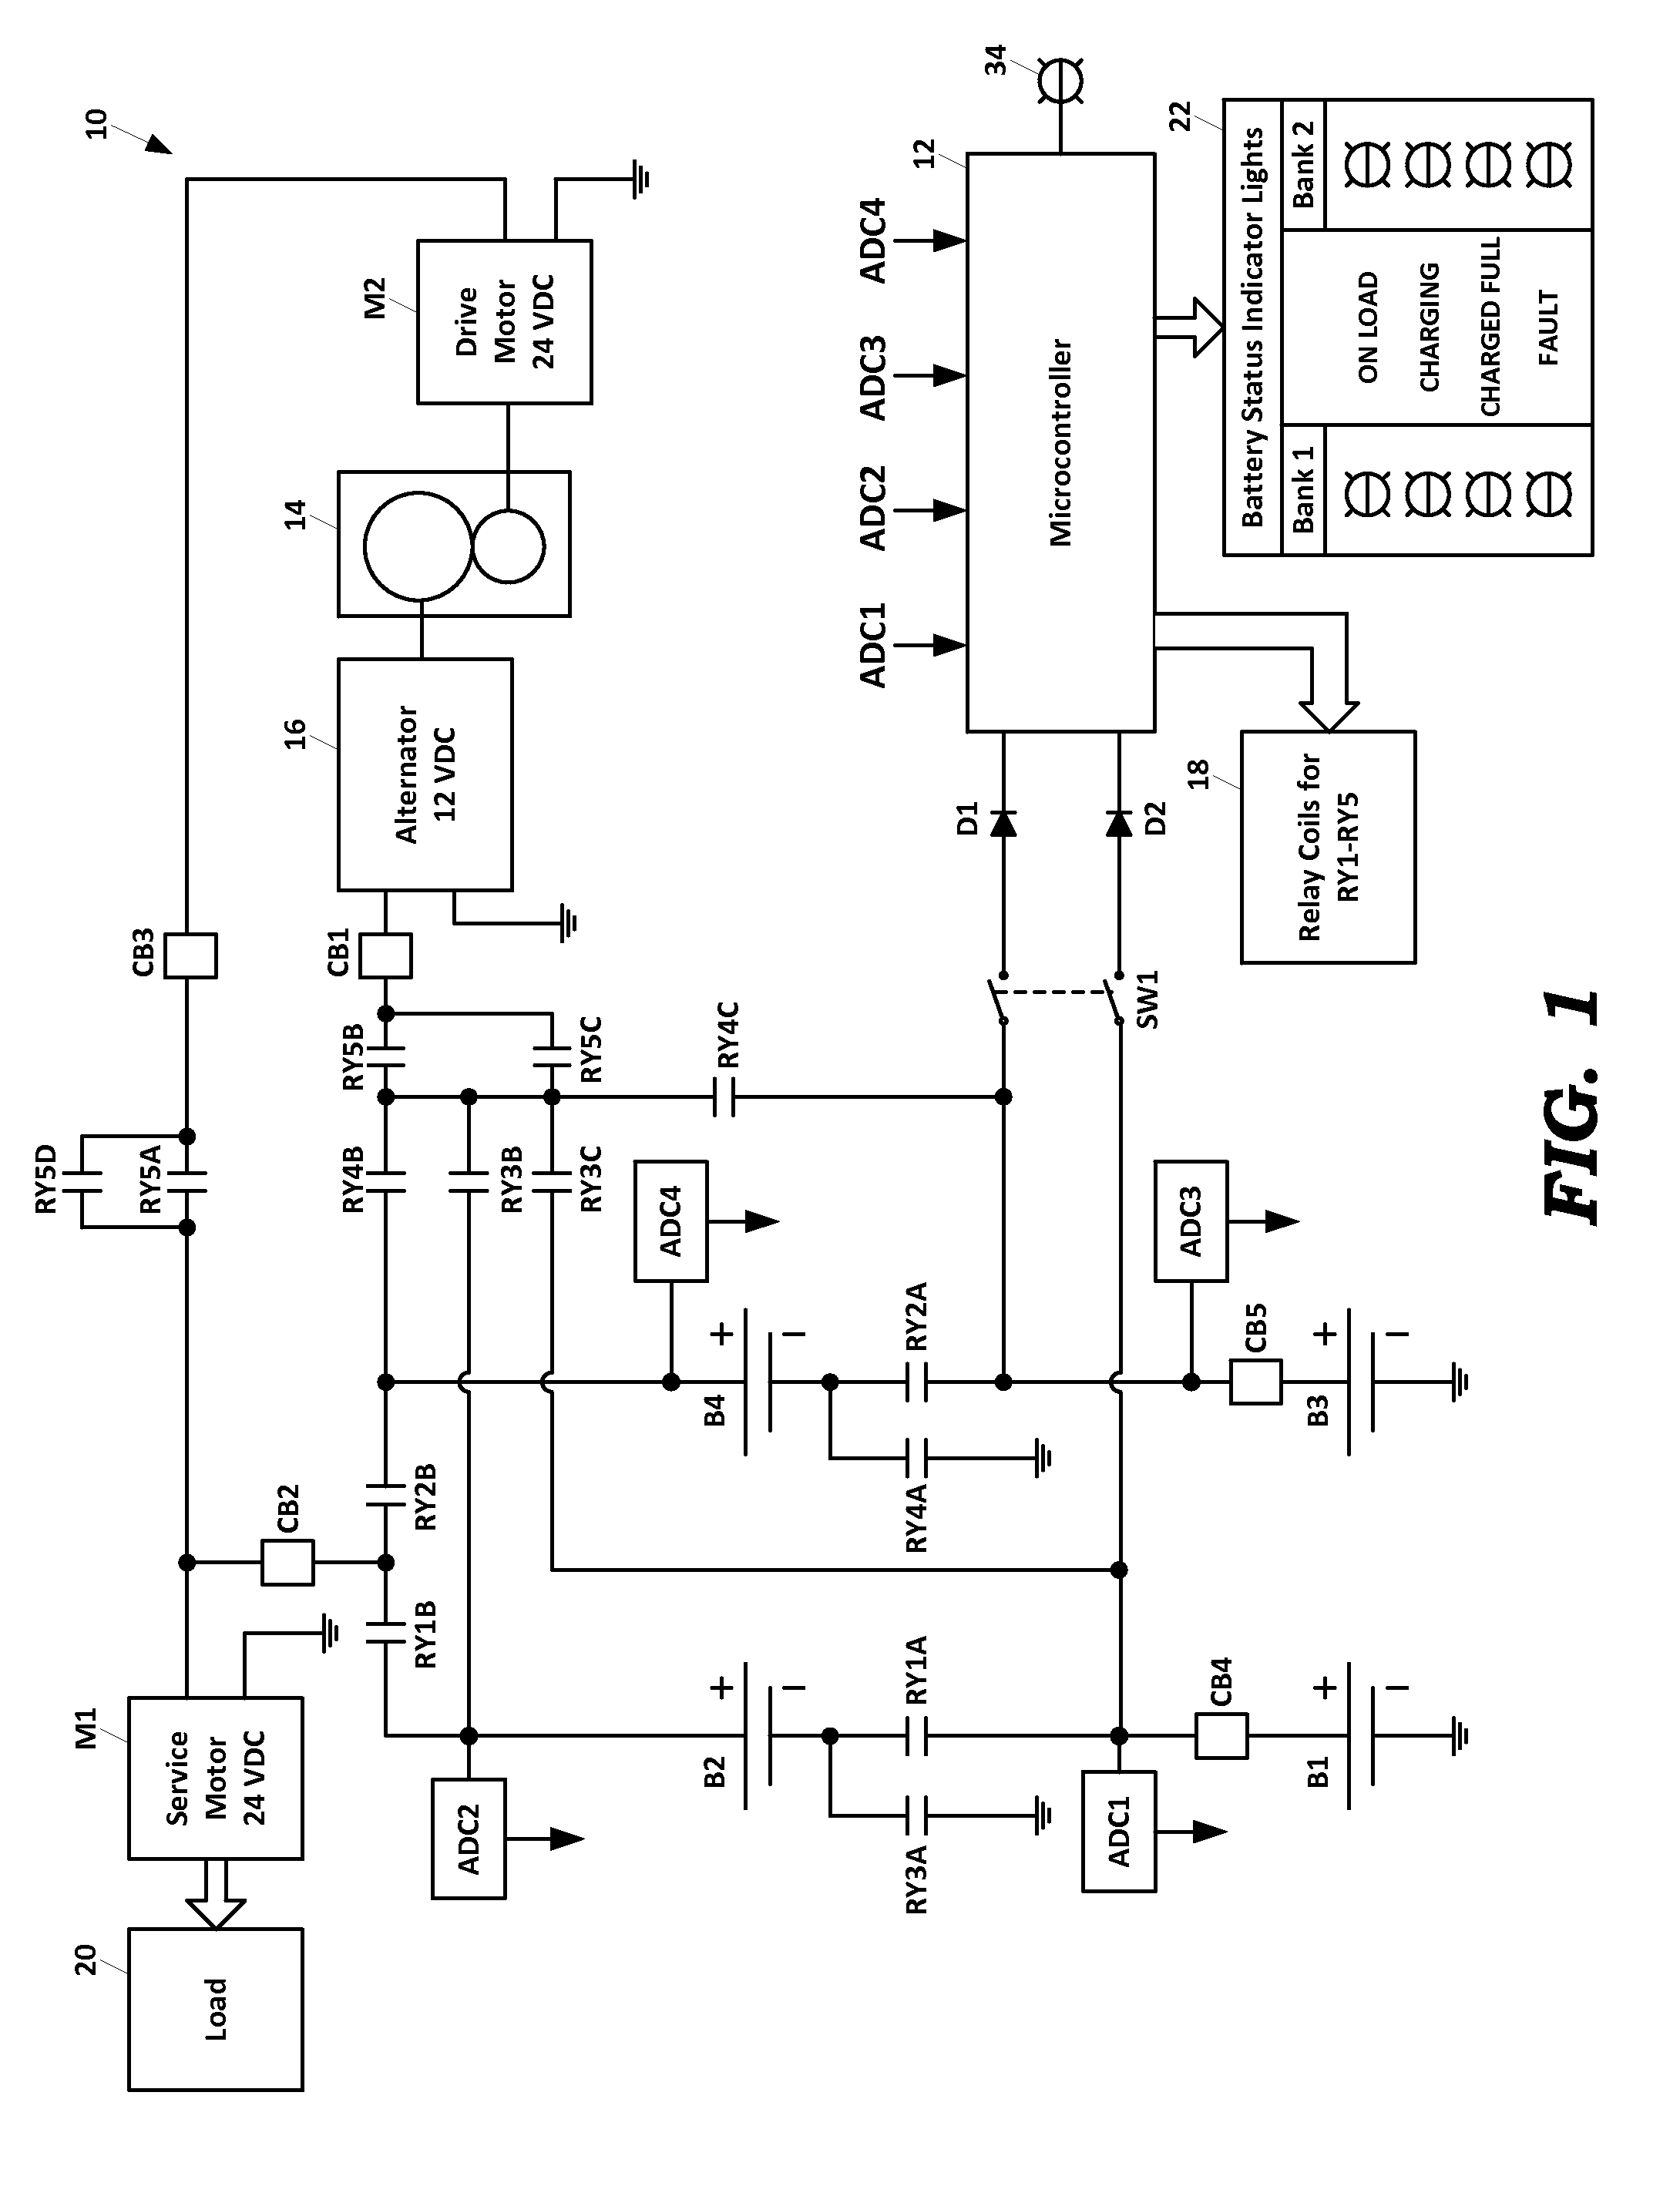 Apparatus and method for charging and discharging a dual battery system